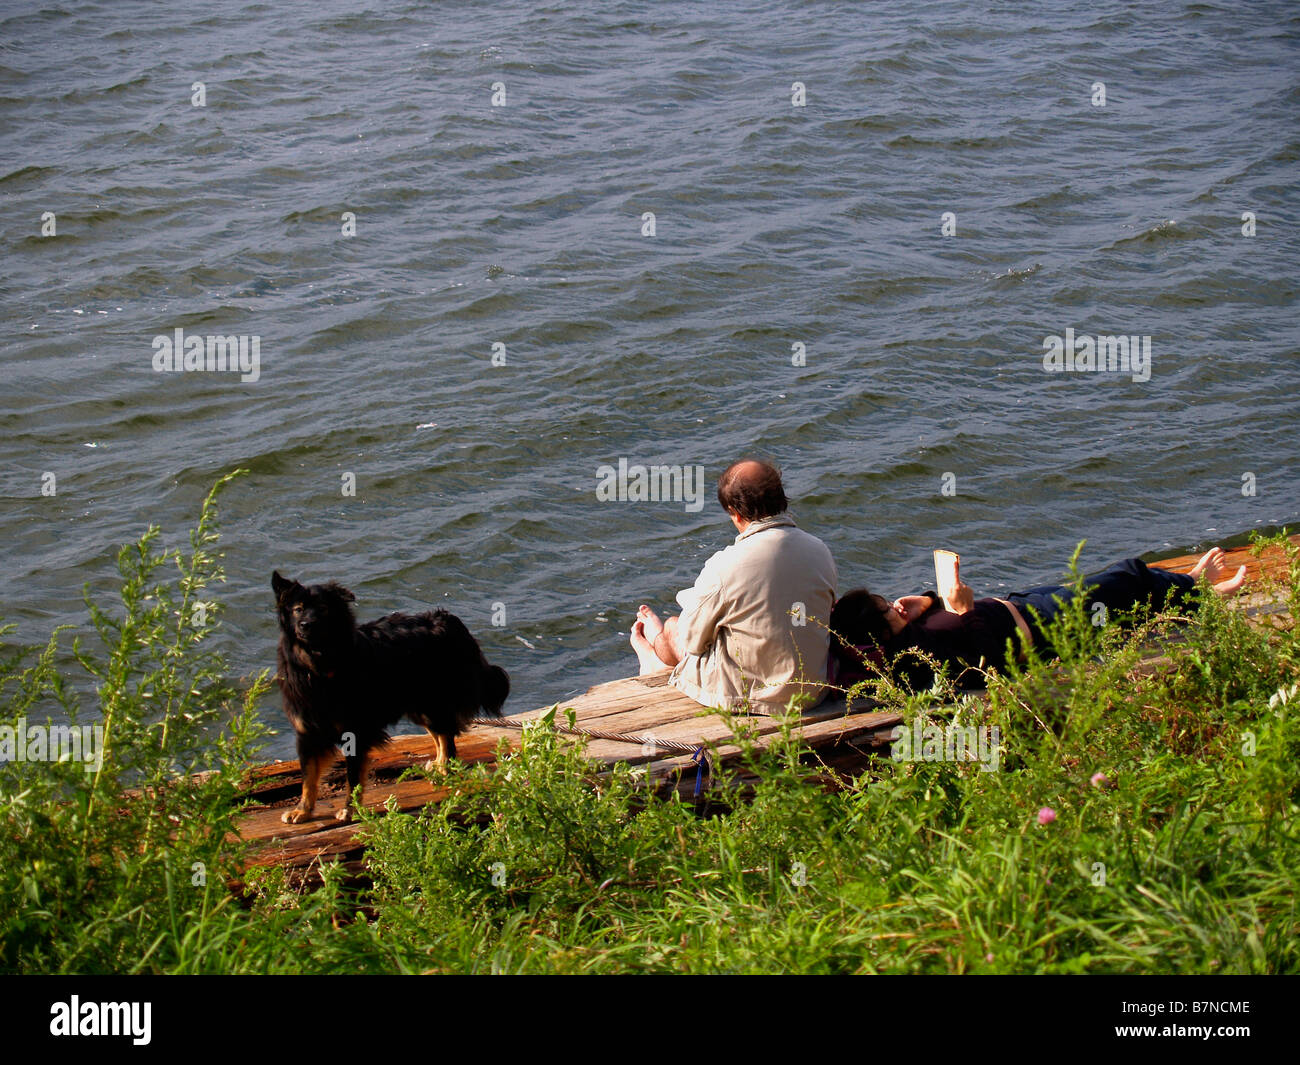 Man and dog on the banks of the Hudson River in Riverside Park, New York City. Stock Photo